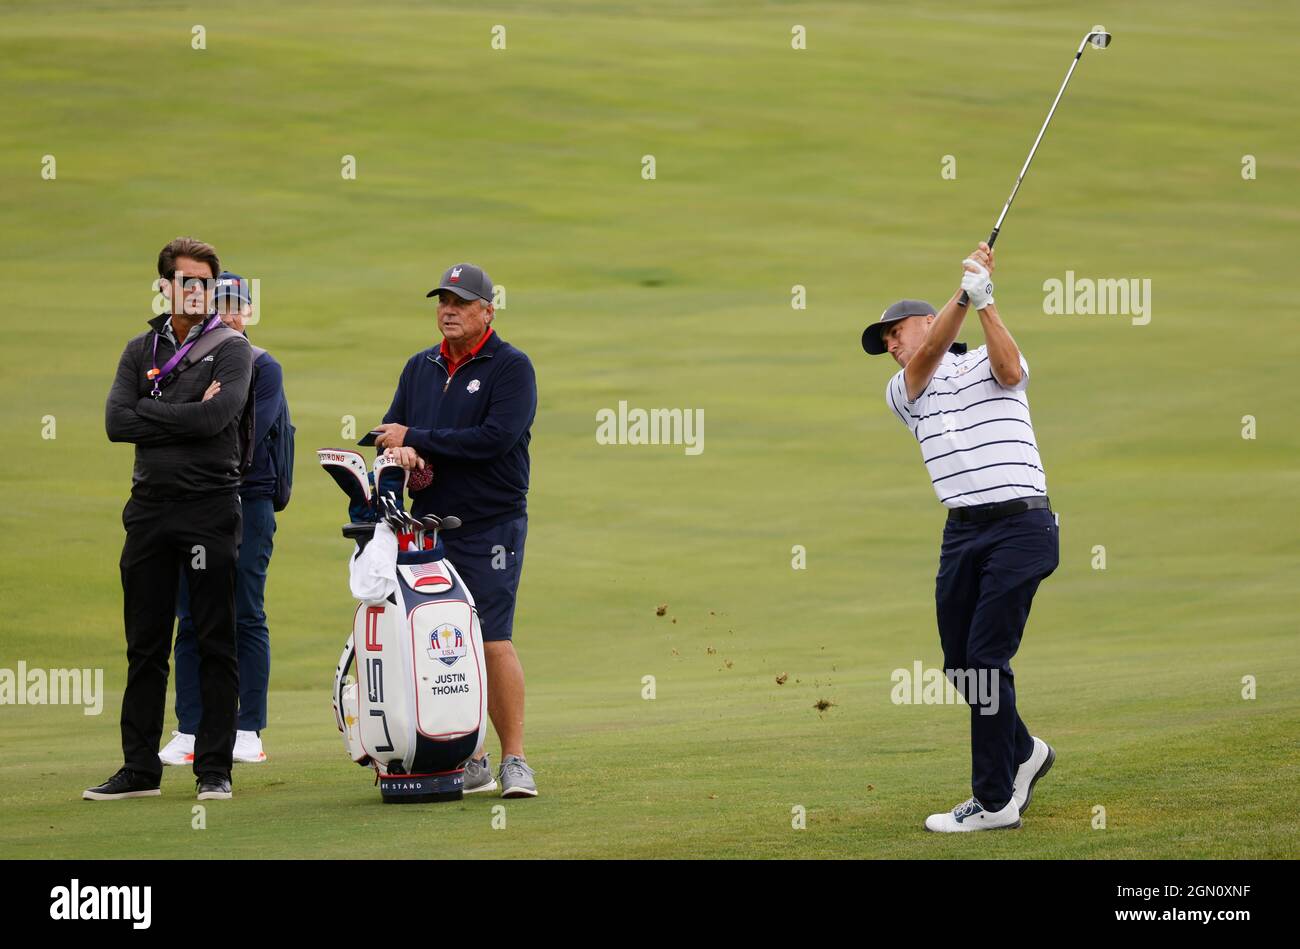 Golf - The 2020 Ryder Cup - Whistling Straits, Sheboygan, Wisconsin, U.S. -  September 21, 2021 Team USA's Justin Thomas hits his approach on the 9th  hole during a practice round REUTERS/Jonathan Ernst Stock Photo - Alamy